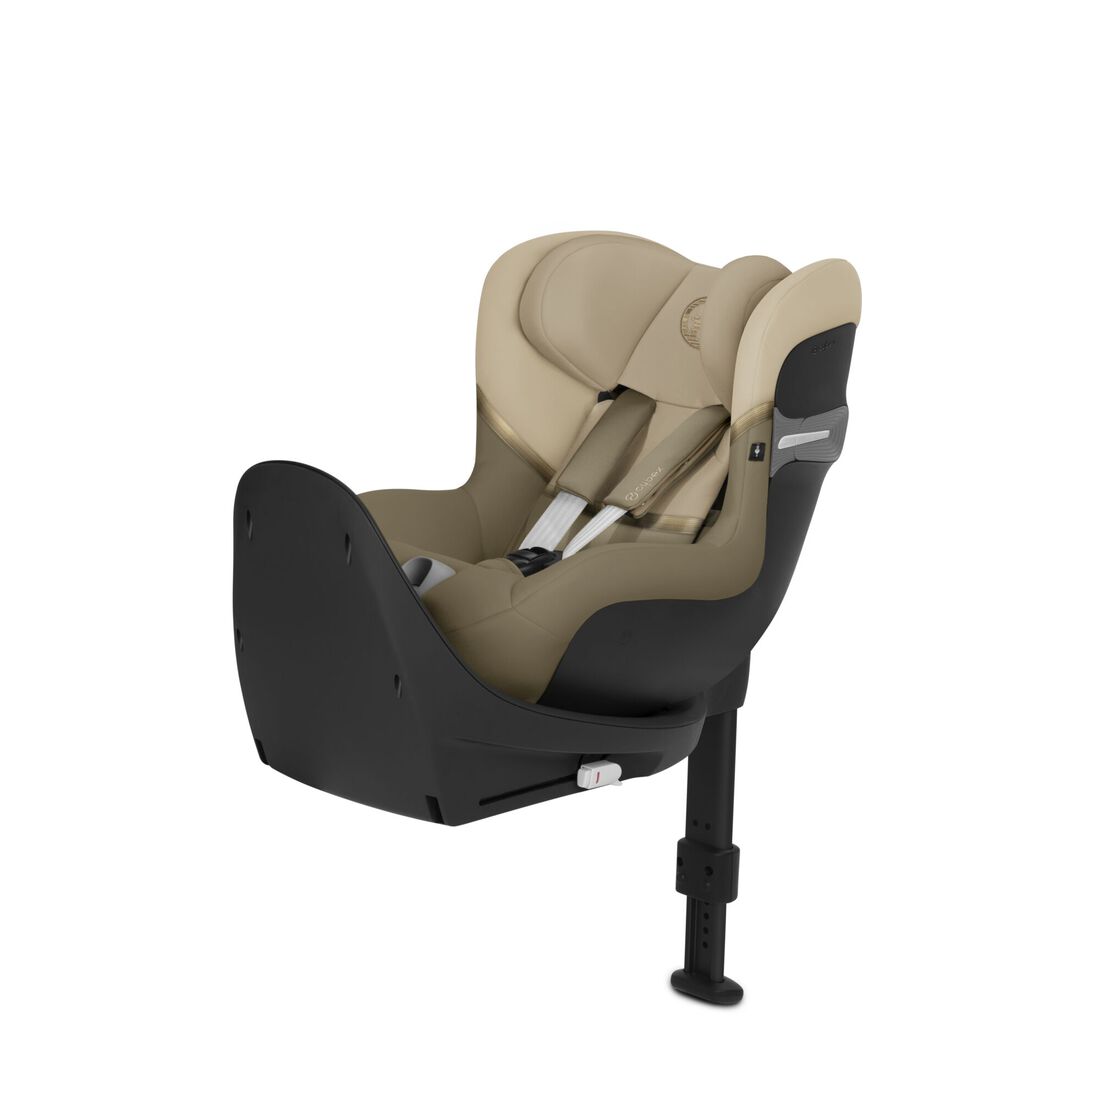 CYBEX Sirona SX2 i-Size - Classic Beige in Classic Beige large image number 1